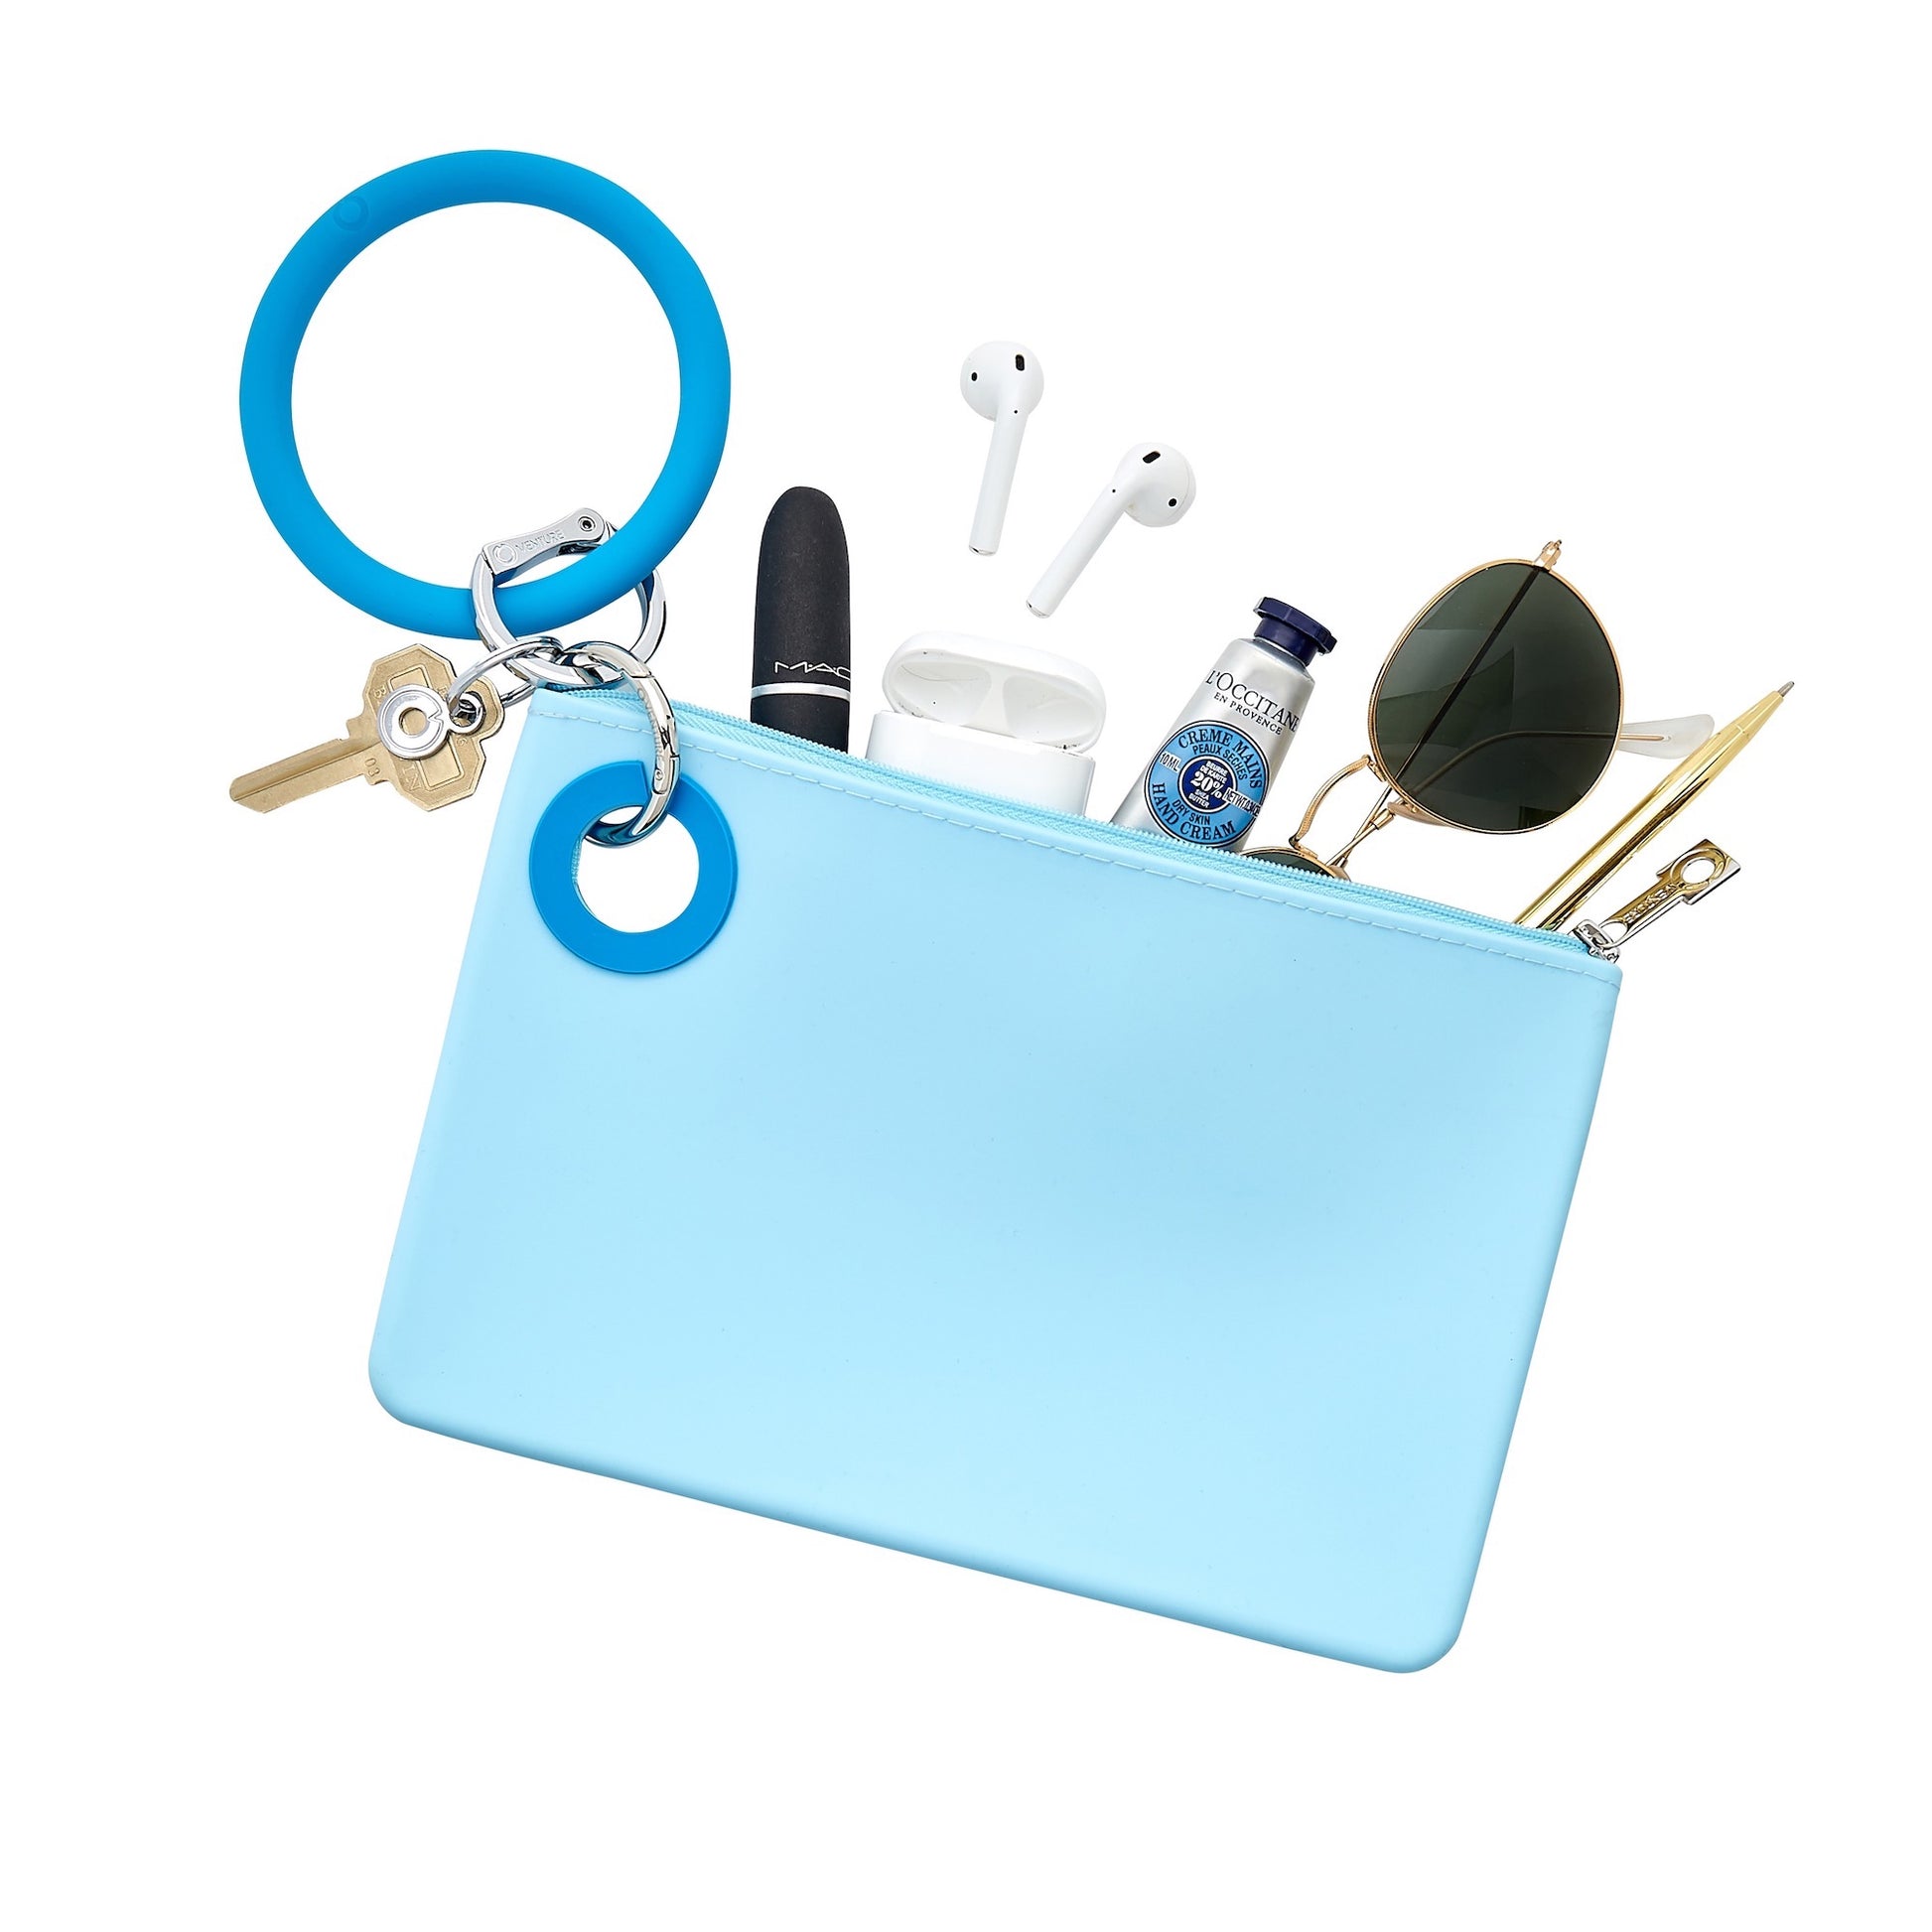 Sweet Carolina Blue - Large Silicone Pouch - Oventure shown holding lipstick, ear pods, sunglasses and hand cream. This large pouch has a big o key ring attached in peacock silicone.